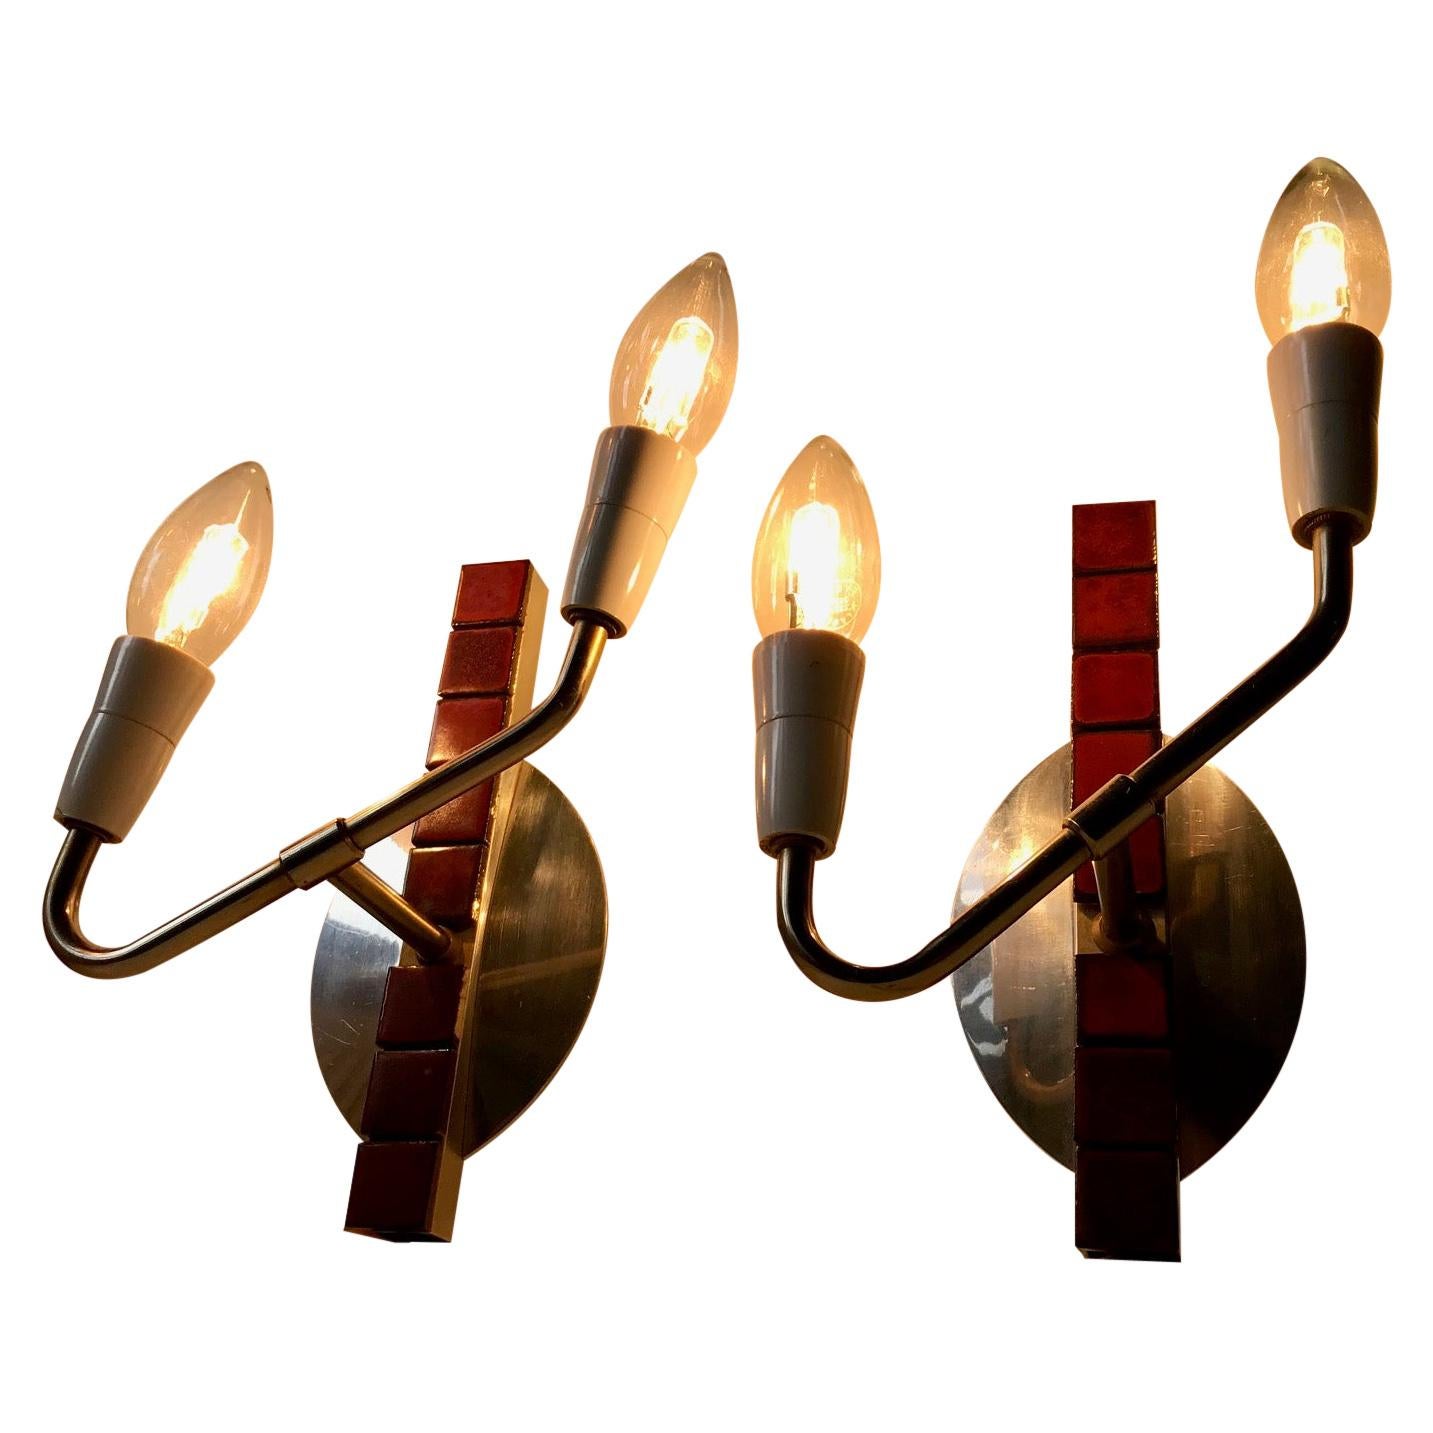 Vintage Danish Polished Aluminium Dual Sconces with Maroon Tiles, 1970s For Sale